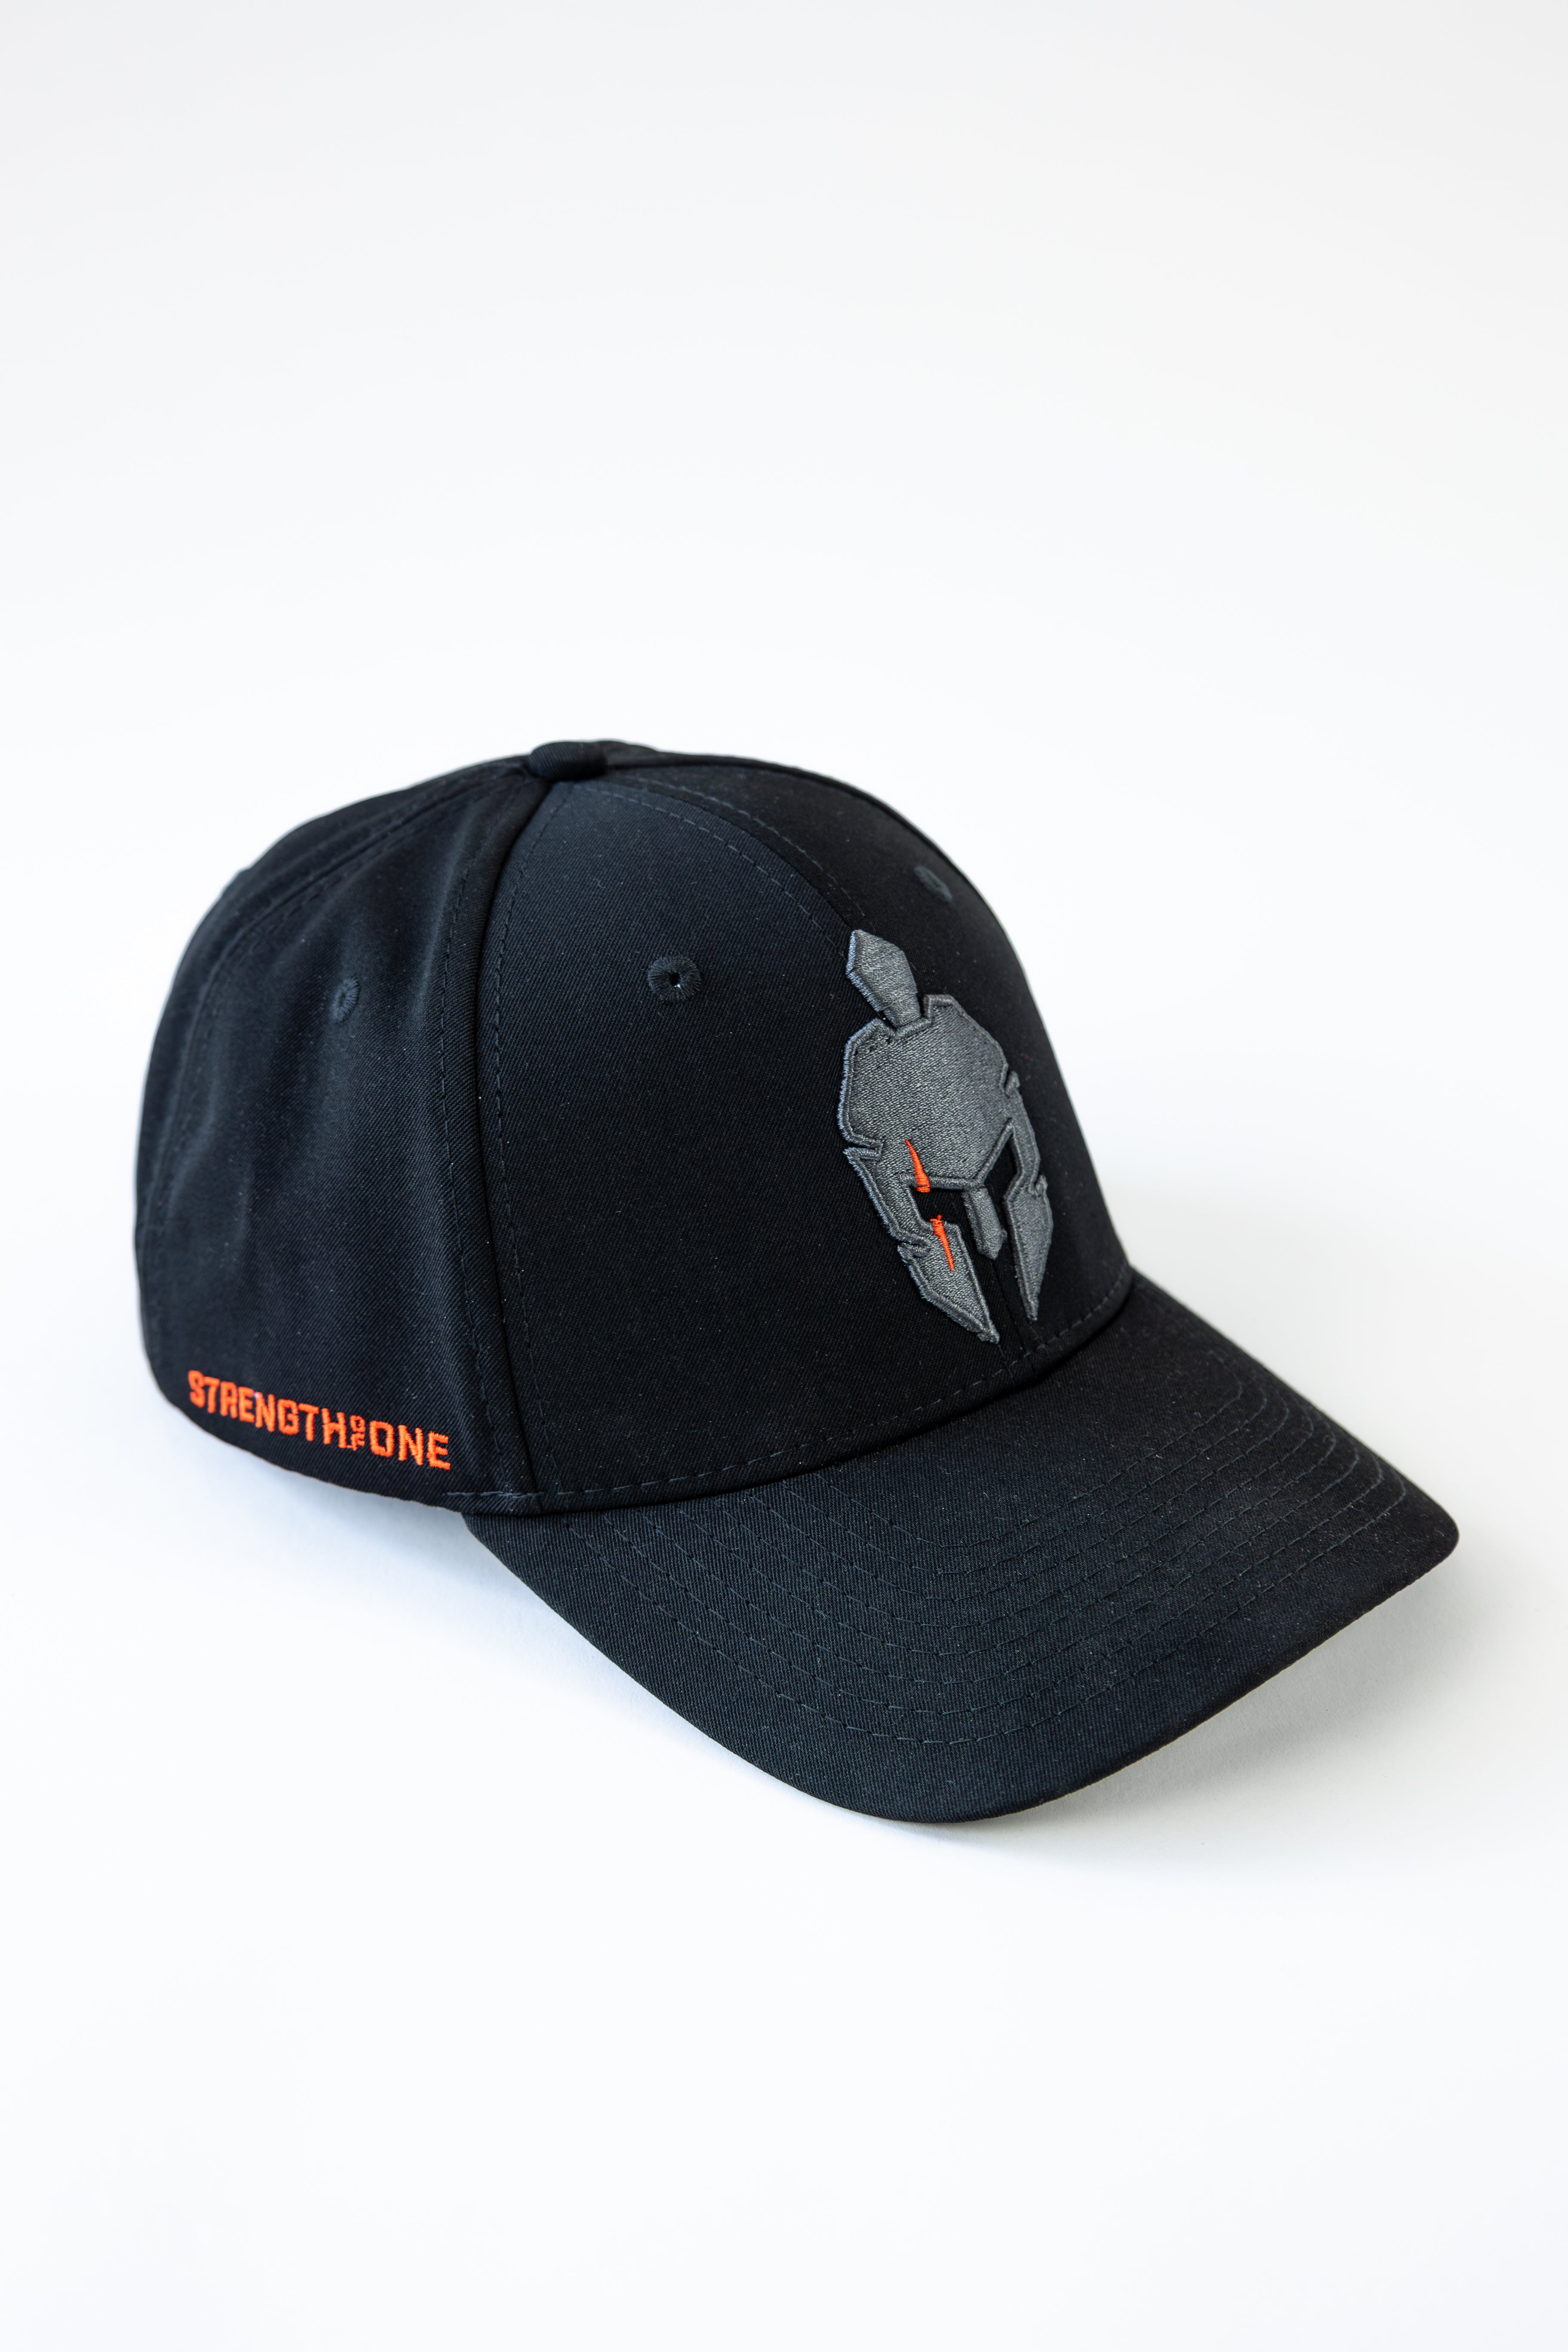 Black Strength of One baseball cap with a gray and orange spartan helmet emblem and Strength of One embroidered on left side